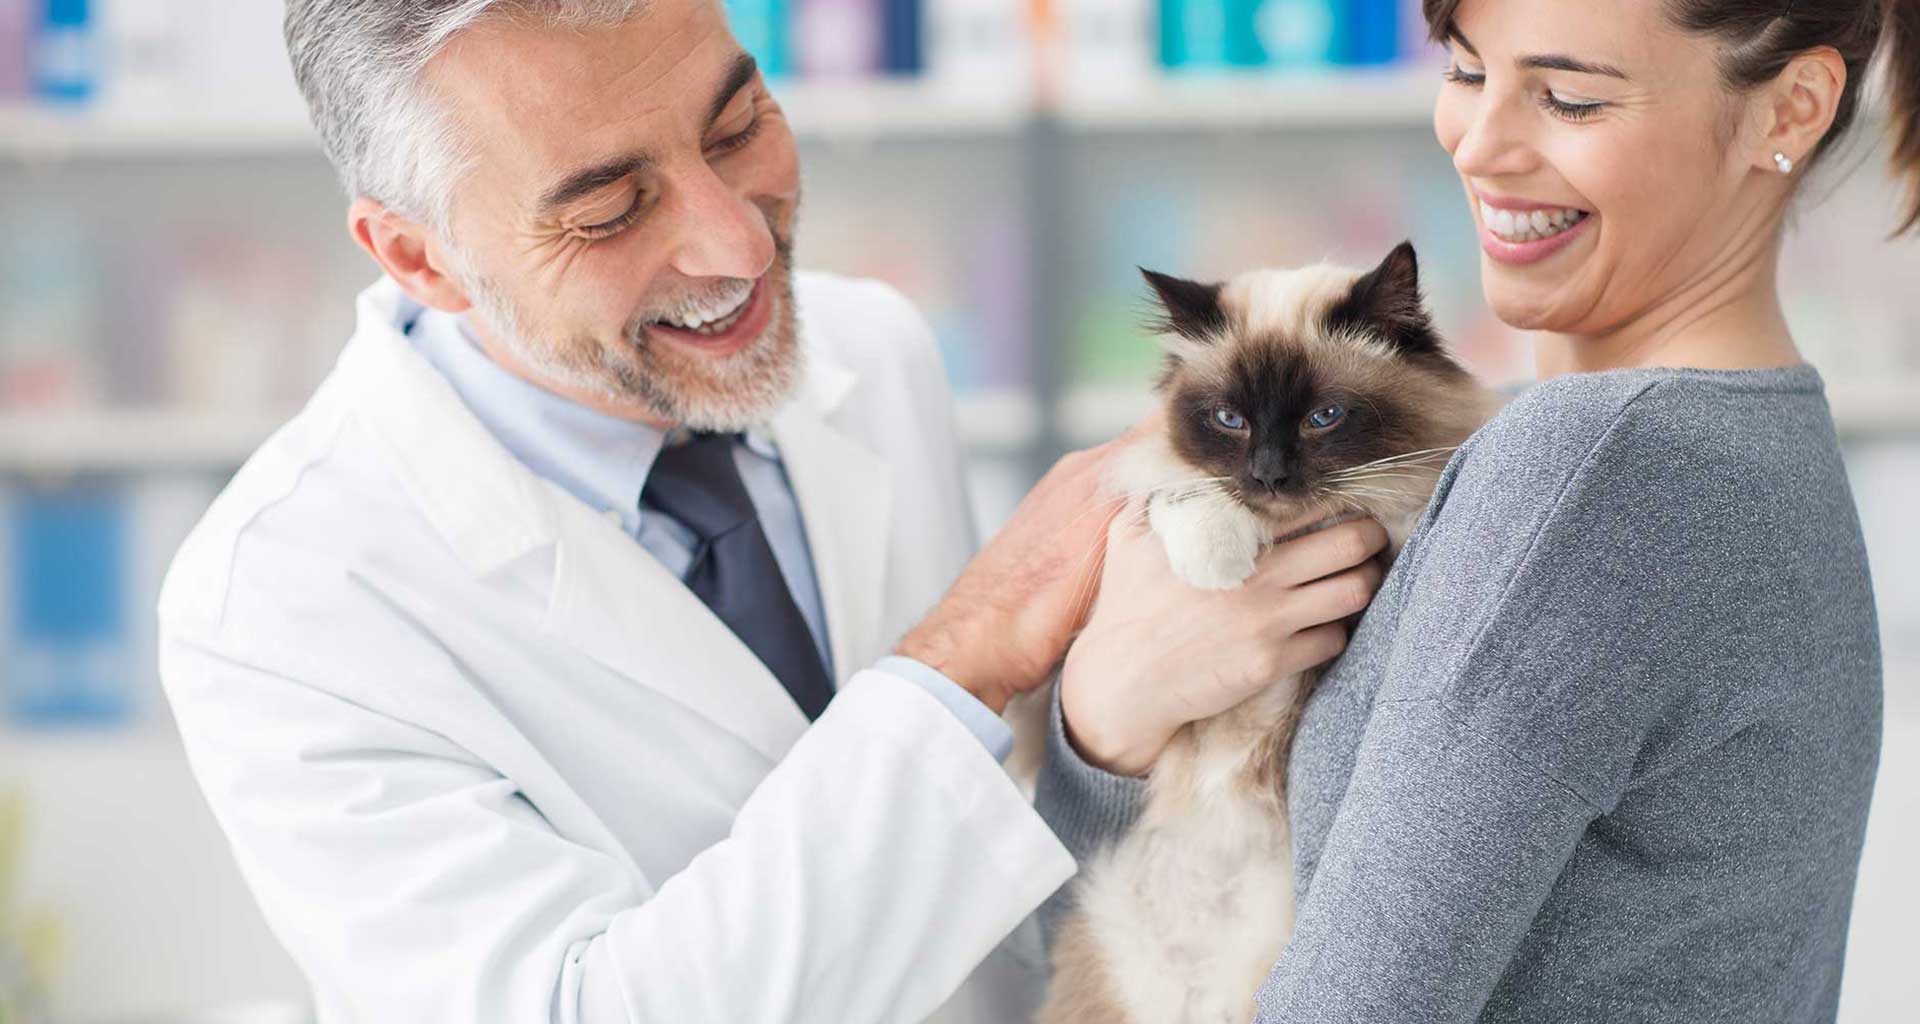 Can you catch a disease from your pet?